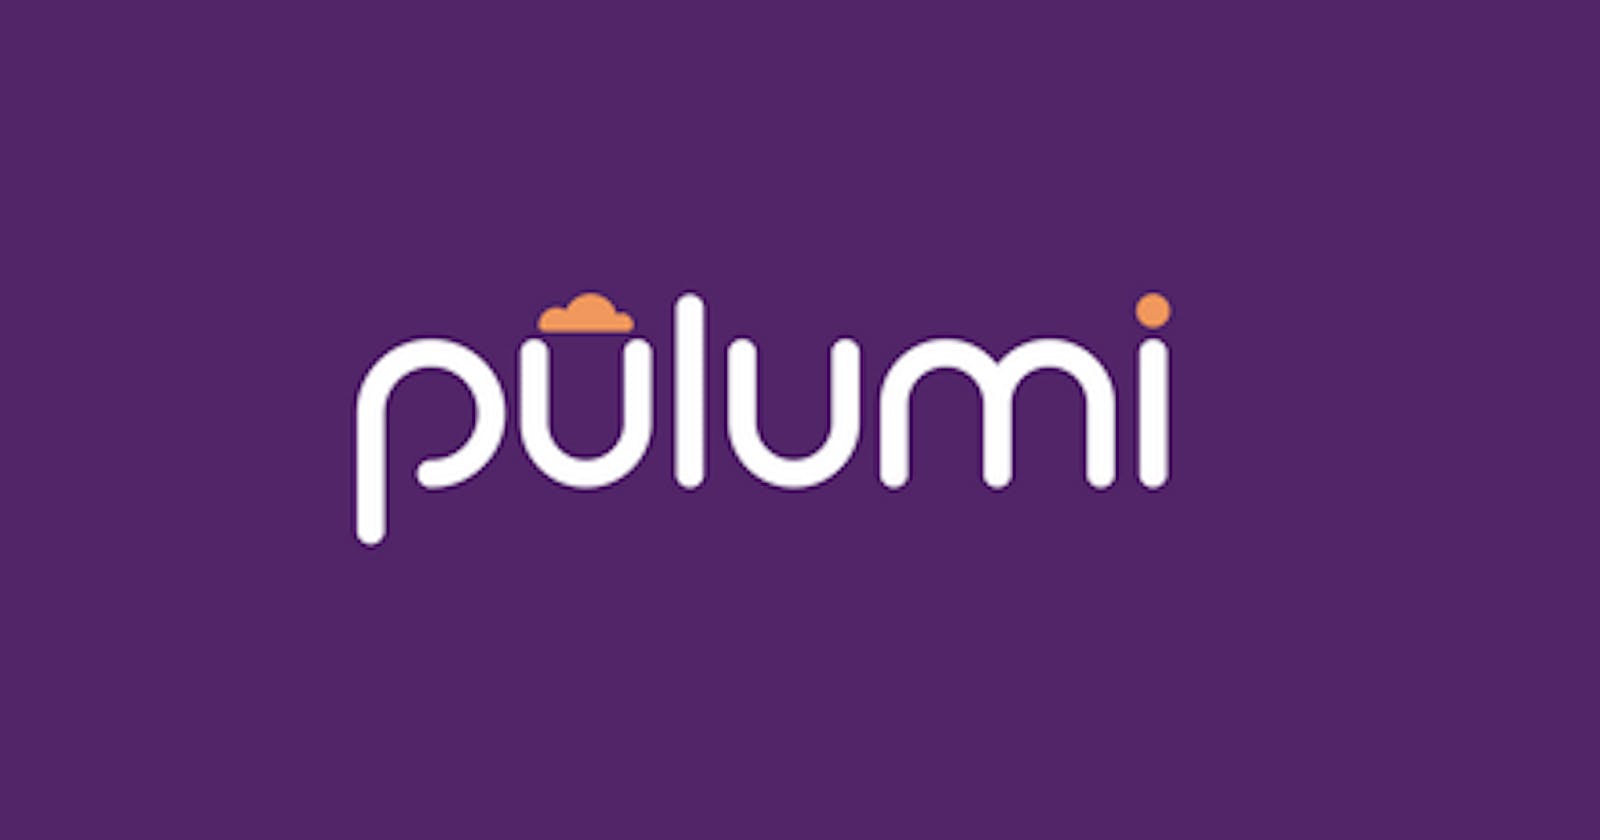 Why I switched from Terraform to Pulumi (Python)